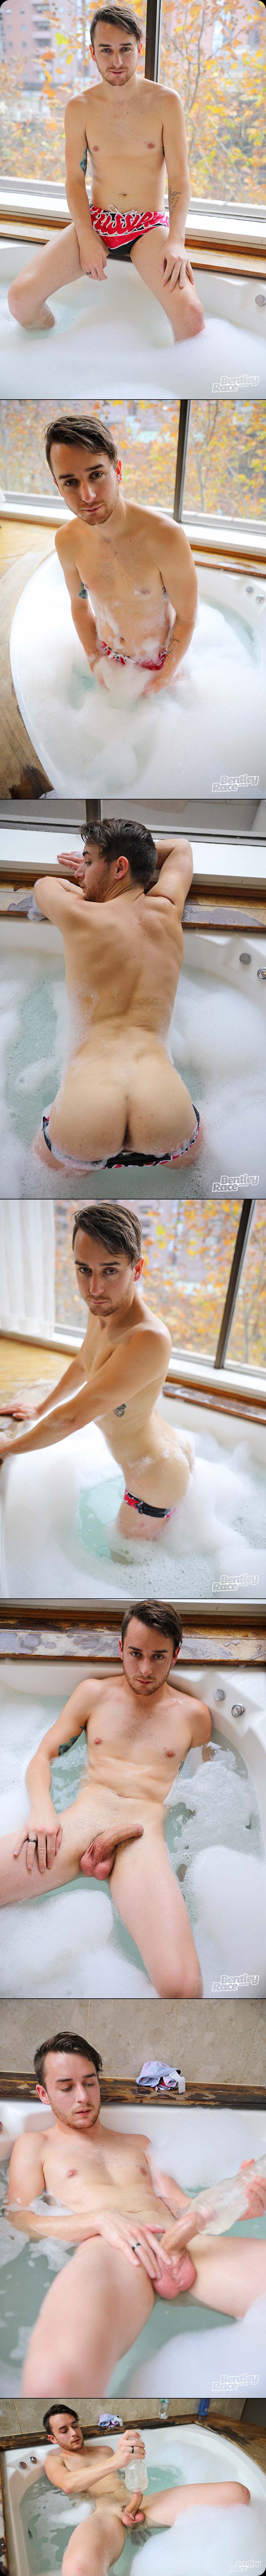 Nate Anderson [Getting My Sexy Mate Off in the Hot Tub] at Bentley Race